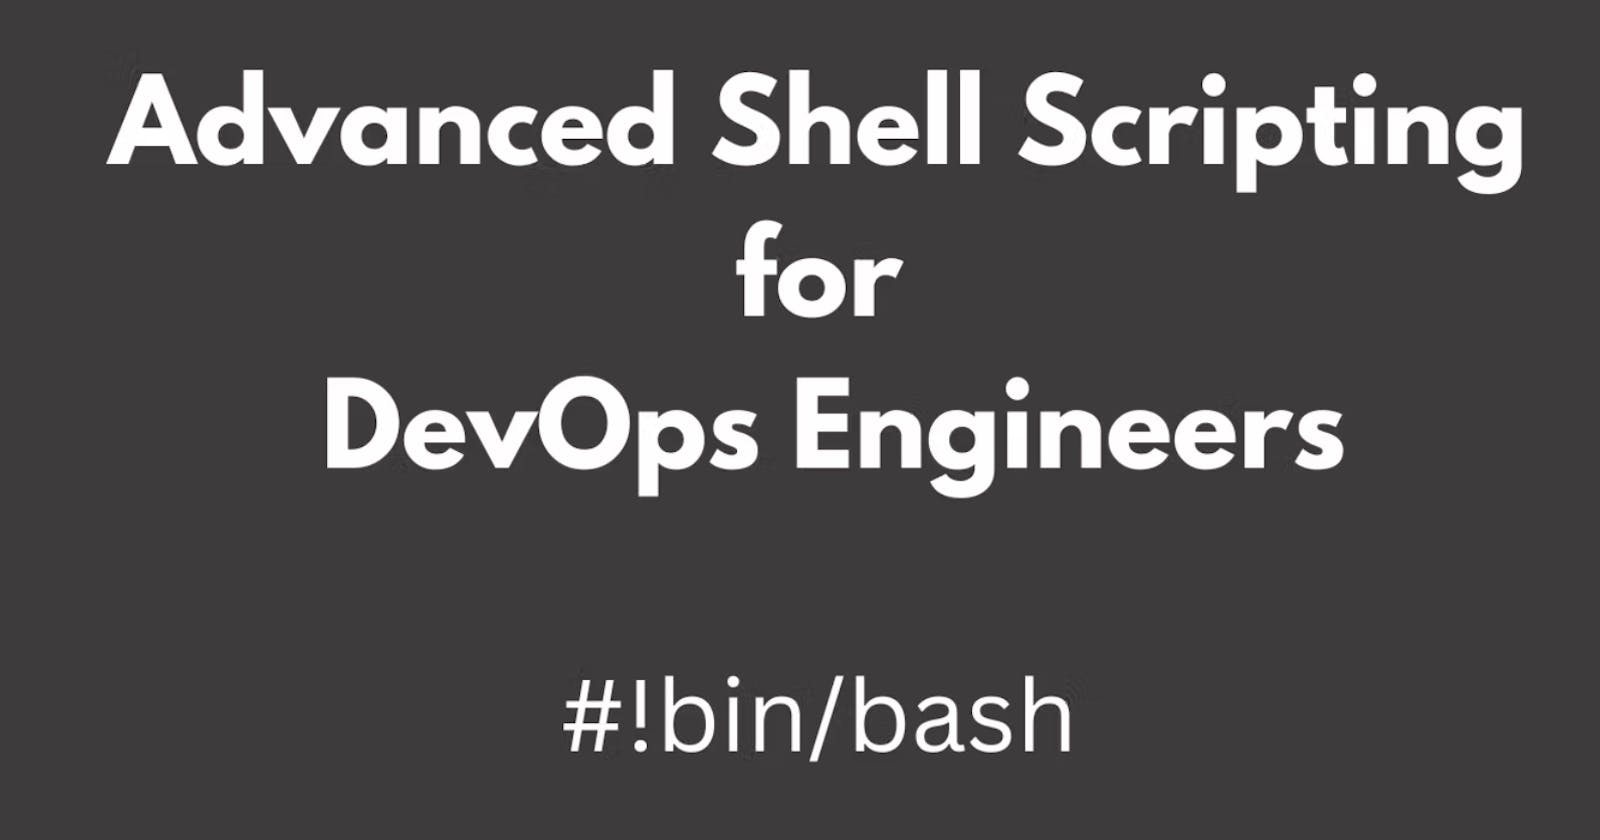 Day 5 Task: Advanced Linux Shell Scripting for DevOps Engineers with User management.